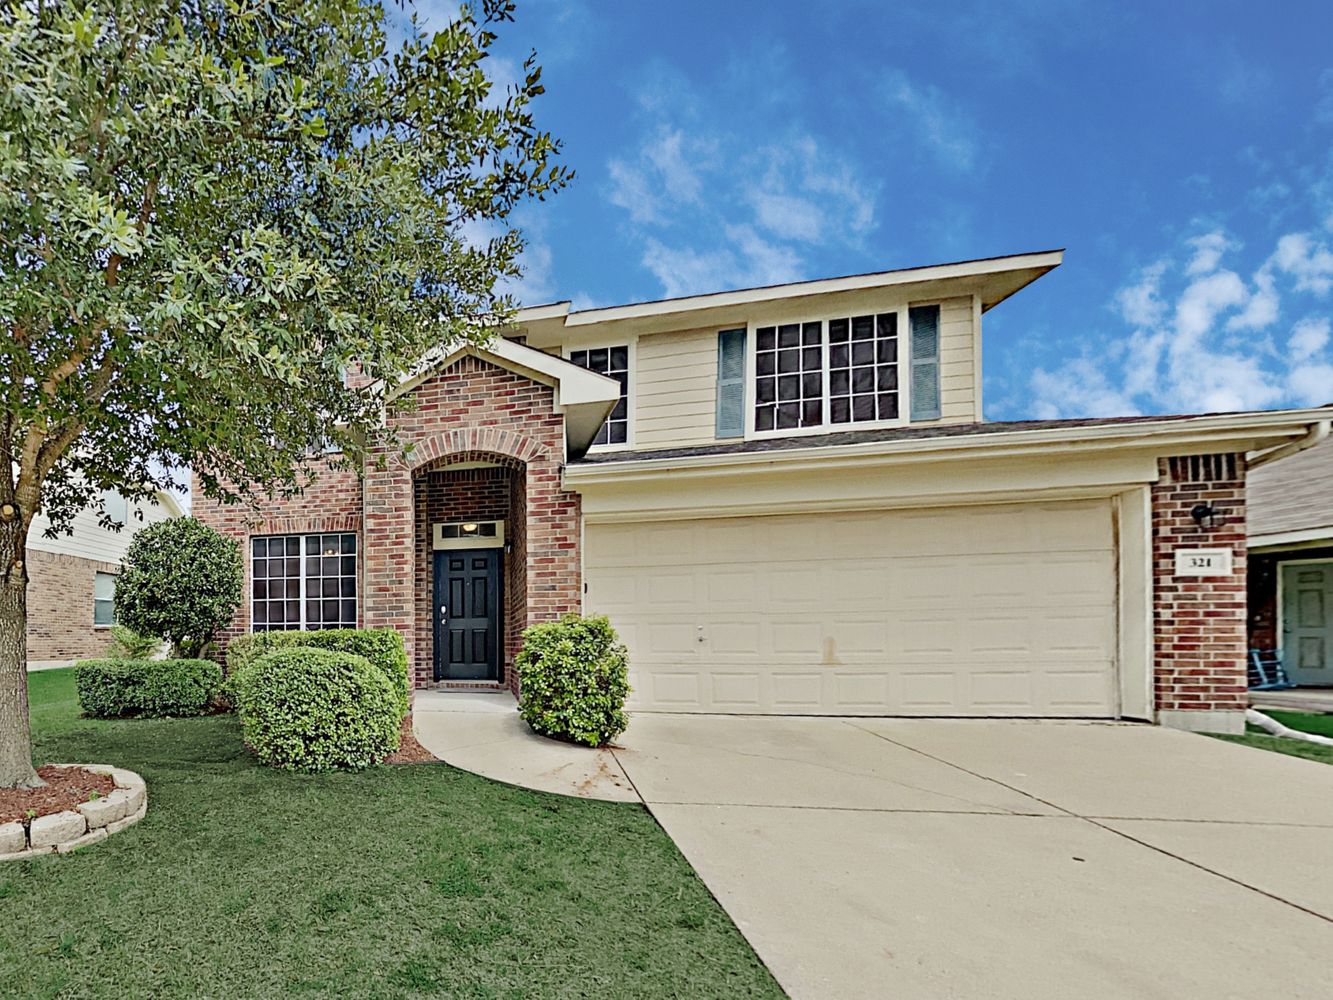 Charming home with covered porch and two-car garage at Invitation Homes Dallas.